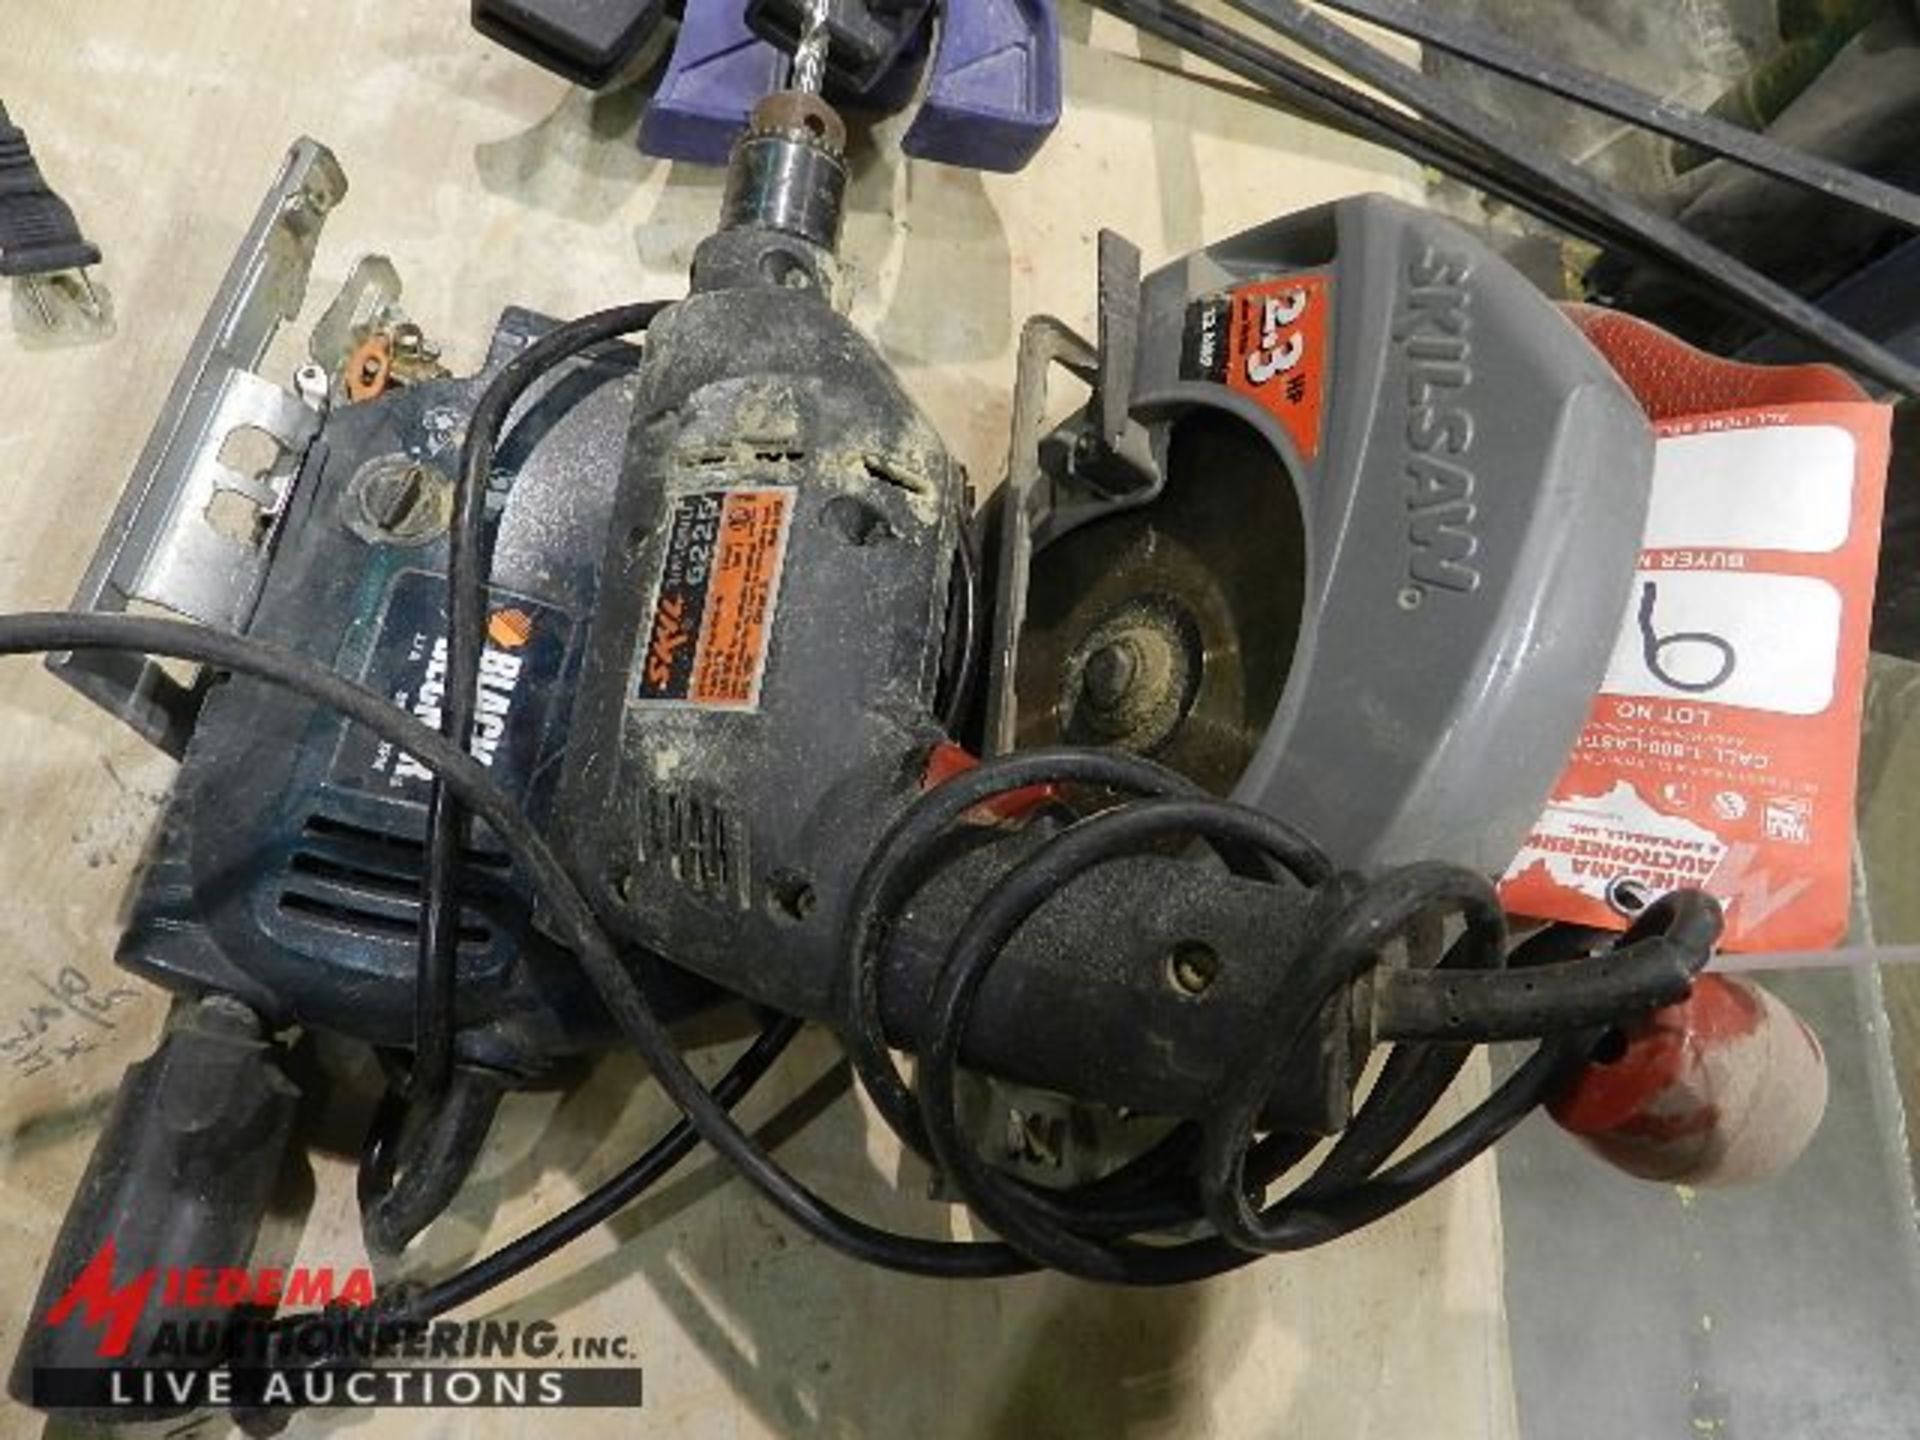 (1) SKILSAW 7 1/4", (1) BLACK AND DECKER JIGSAW, (1) SKIL 3/8" ELECTRIC DRILL - Image 2 of 3